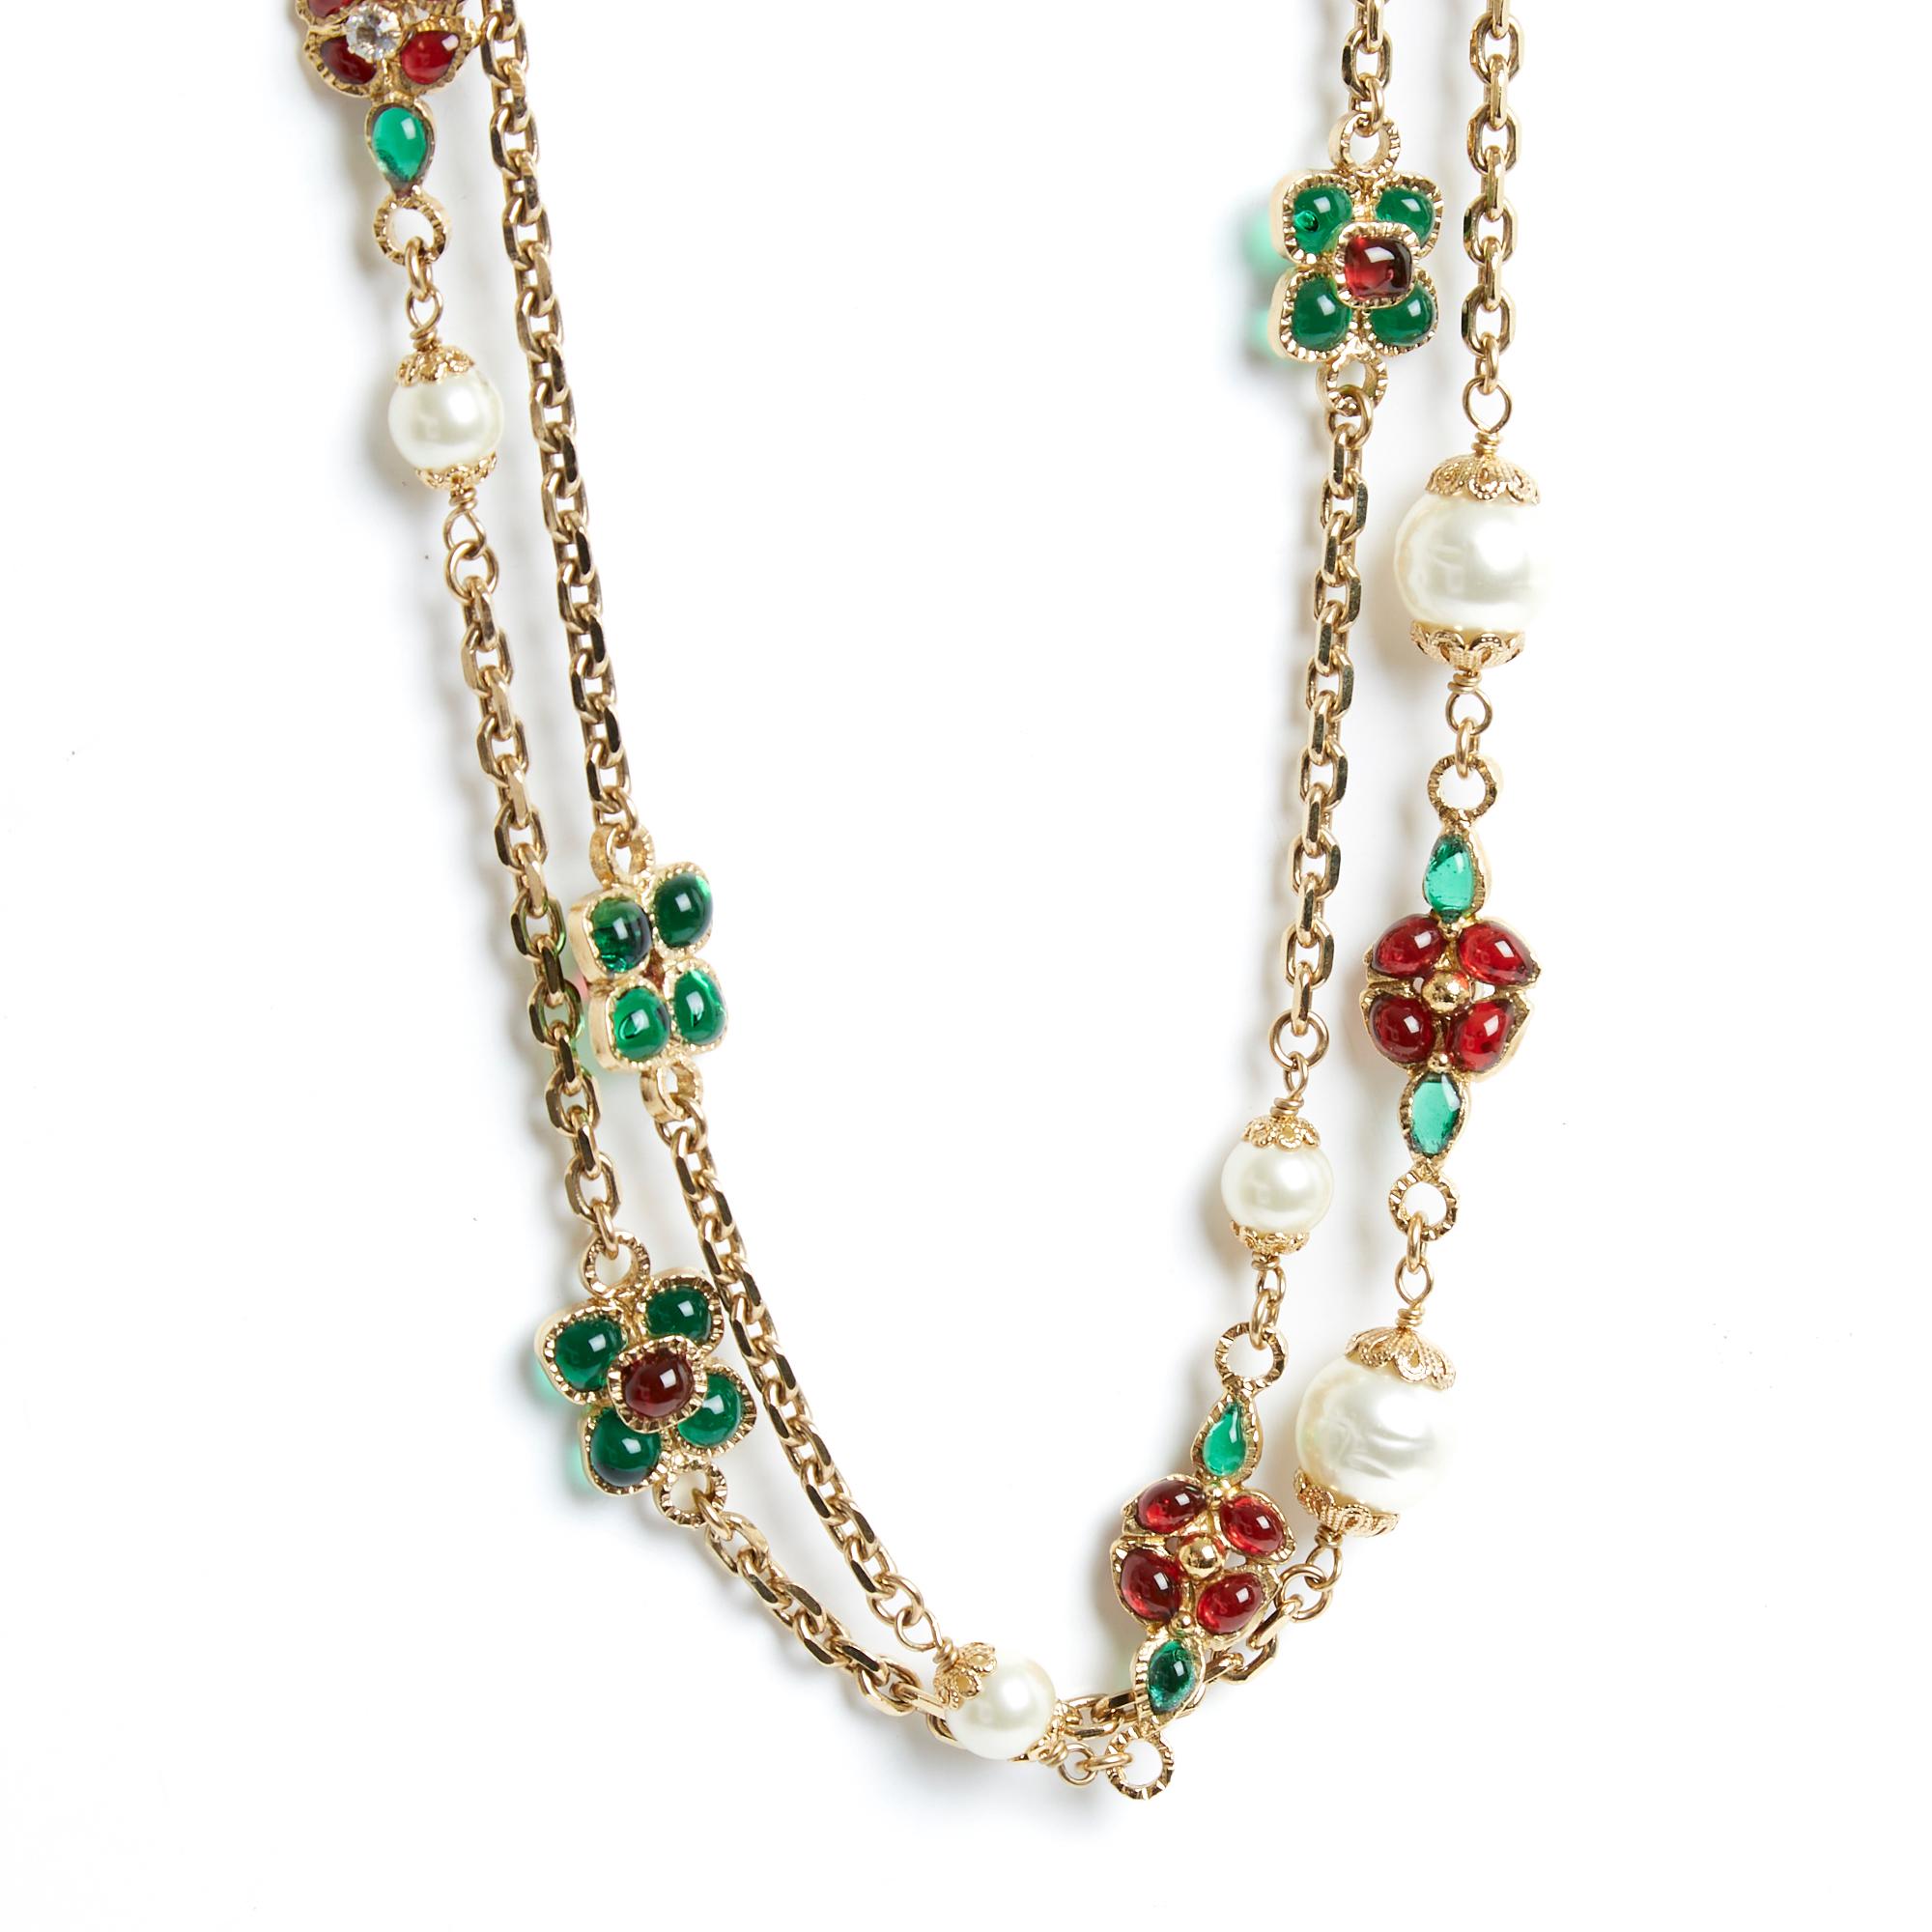 Chanel 2005 Resort collection (Paris Bus Tour) necklace string made up of 2 long convict mesh chains interspersed with different fancy pearls and floral patterns in green and red glass paste, Gripoix style, hook closure decorated with 2 cabochons,